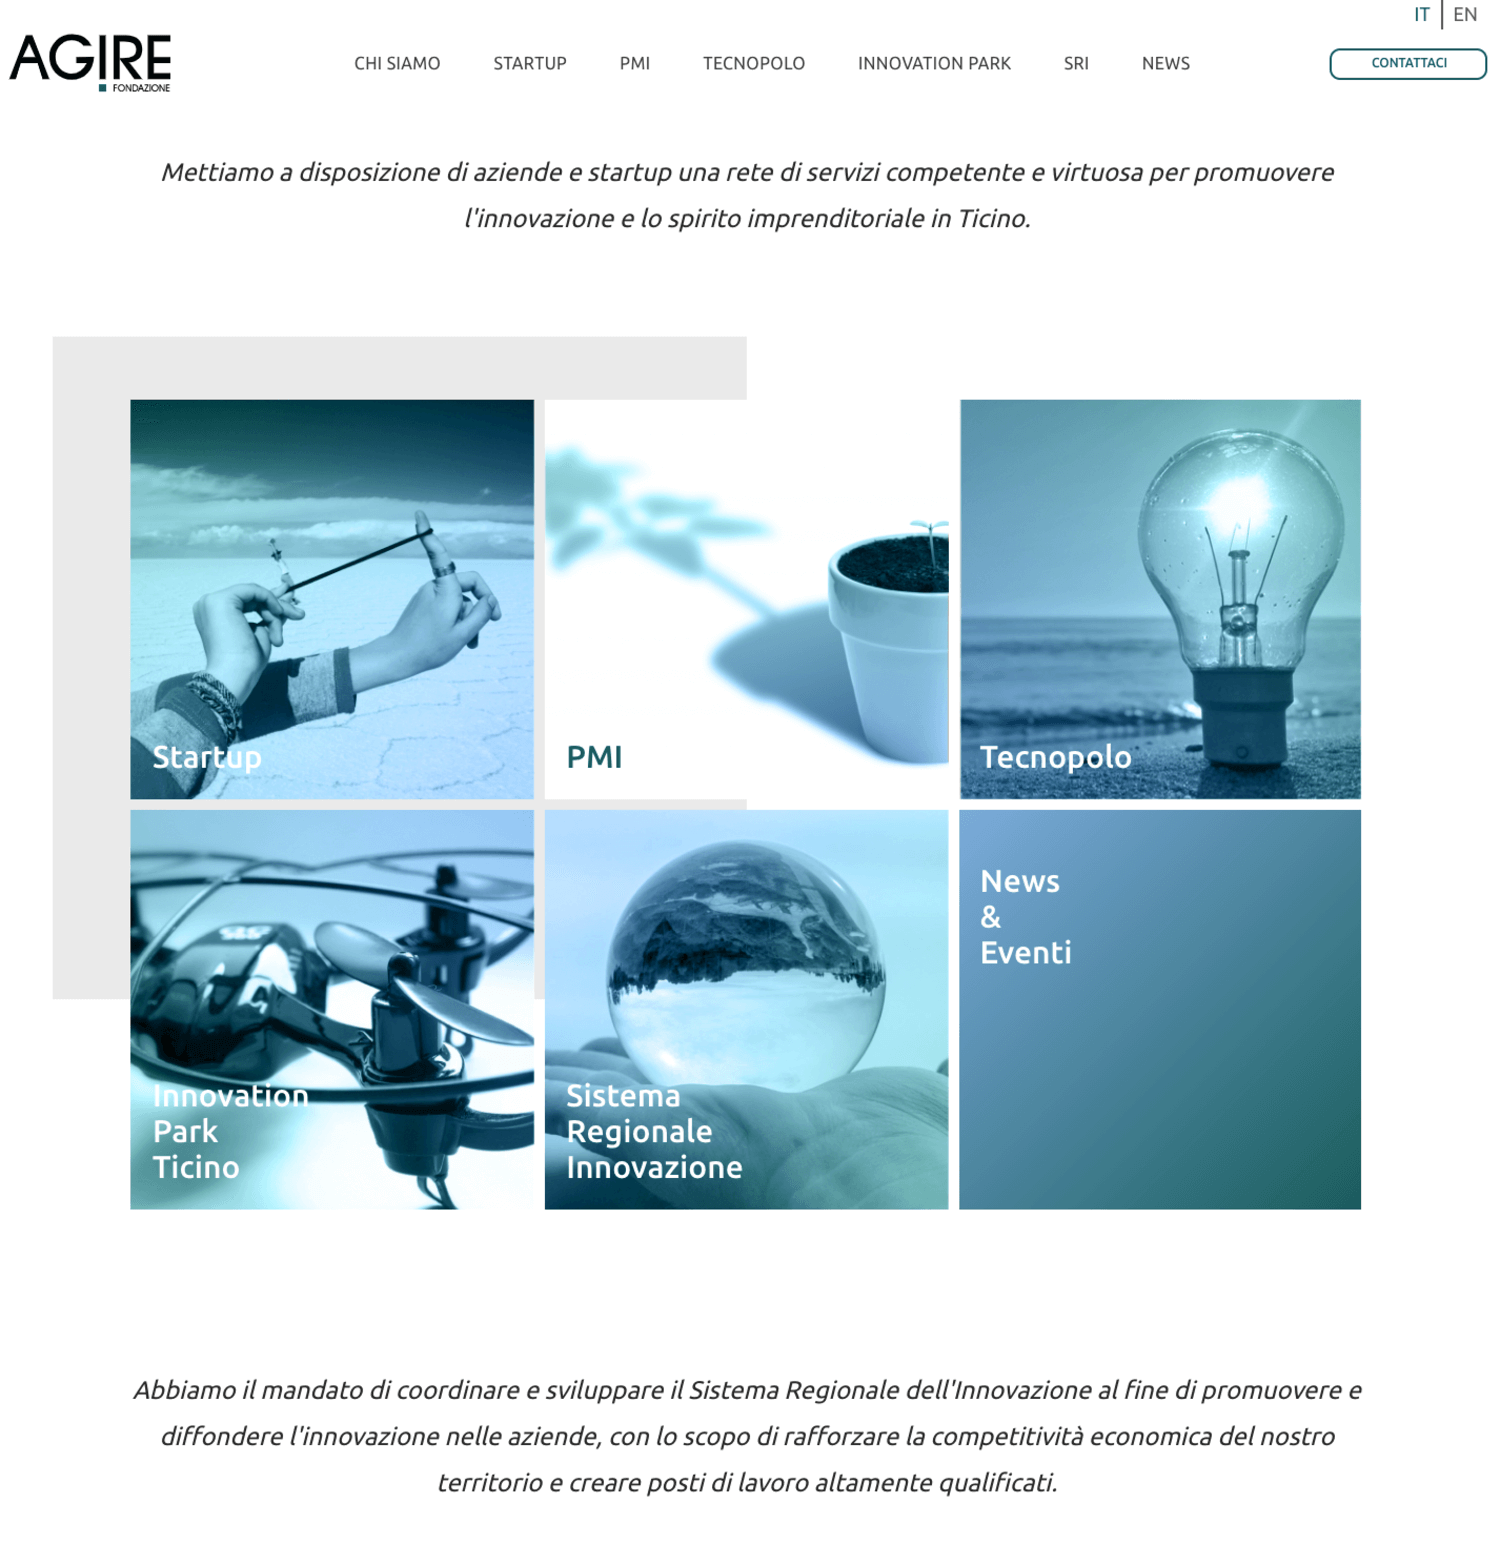 AGIRE Foundation renews its corporate identity and launches a new website with enhanced functionalities